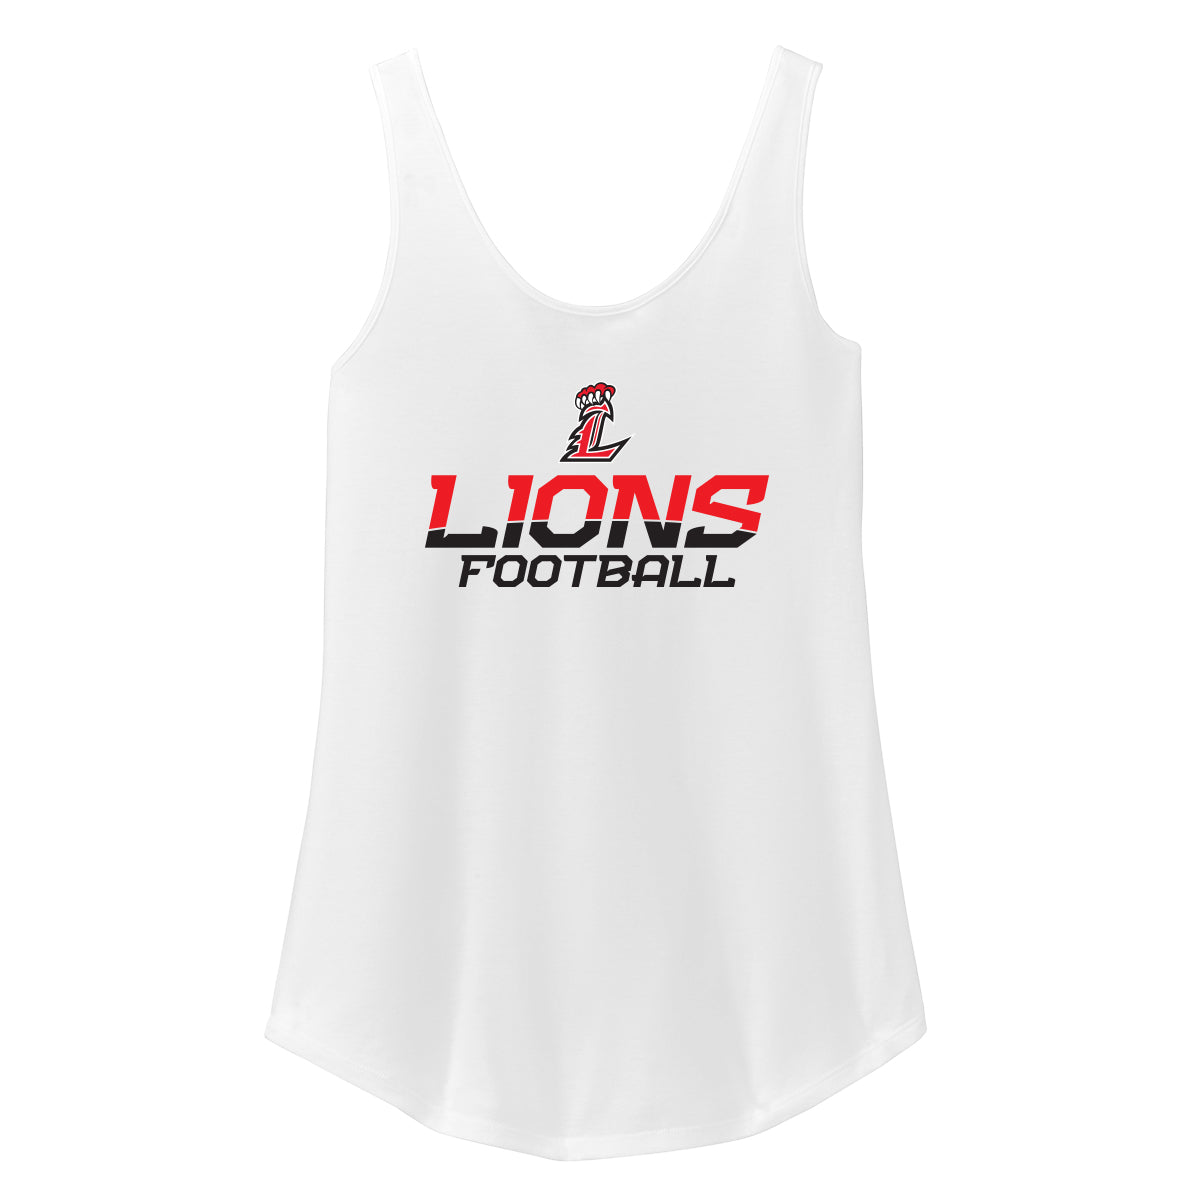 Lions Football (two color) Women's Tank Top